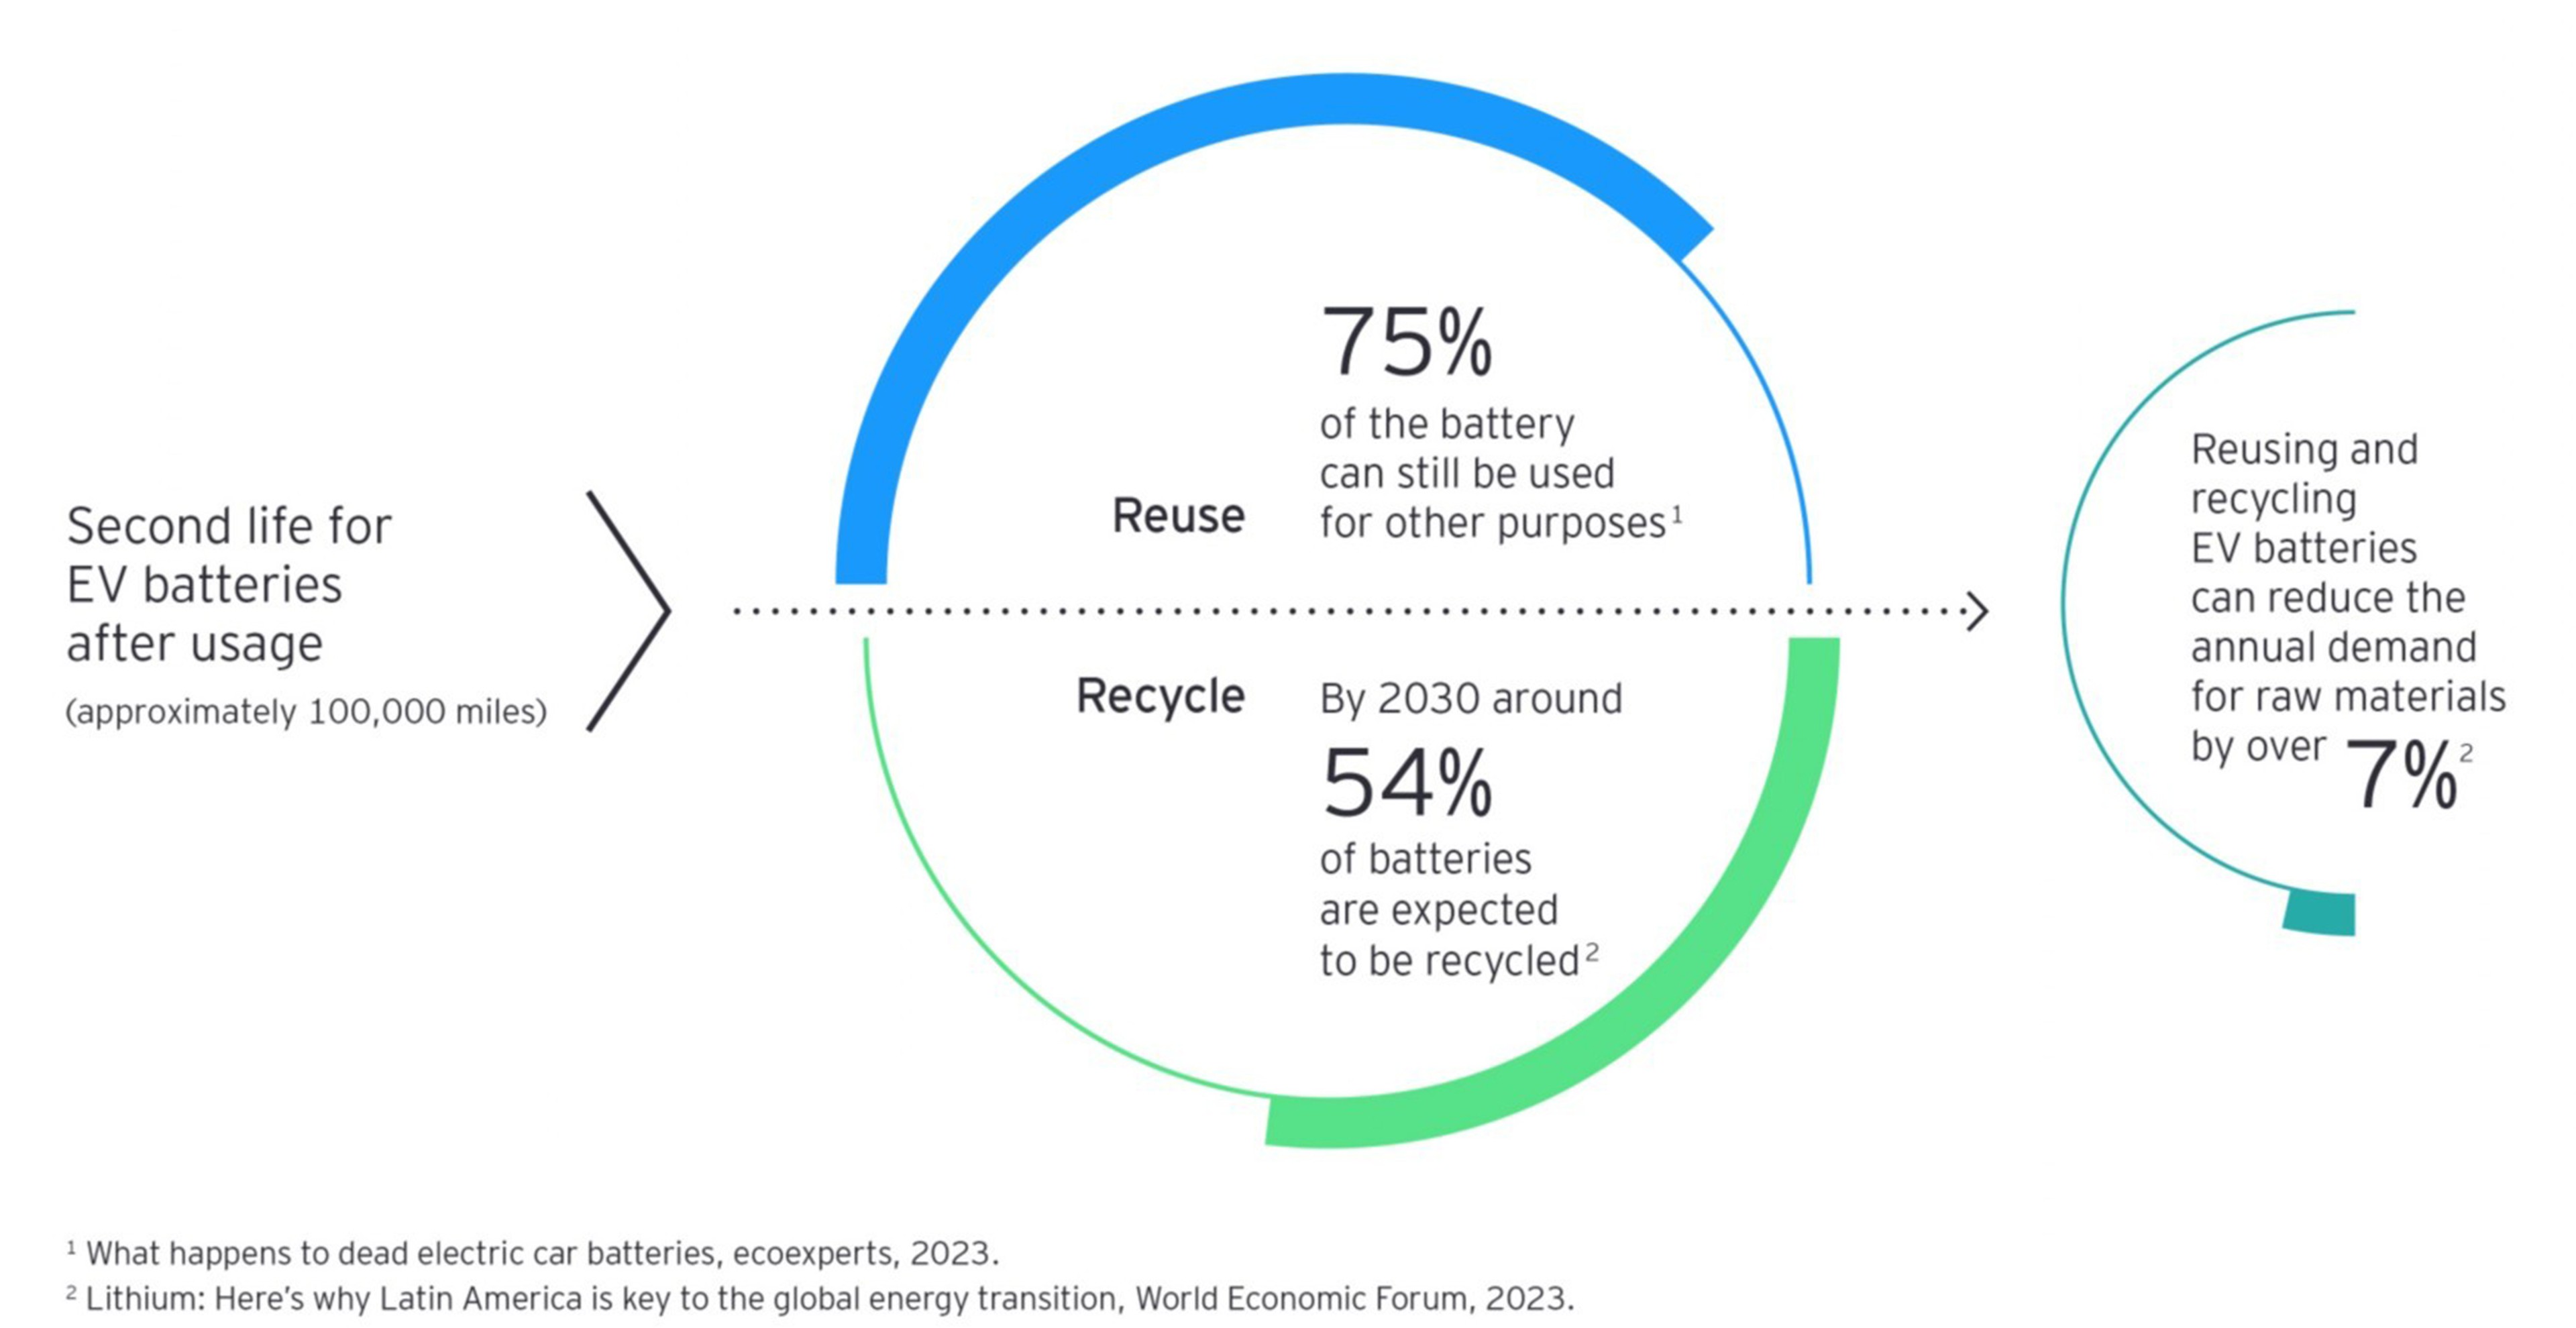 The potential impact of a circular economy